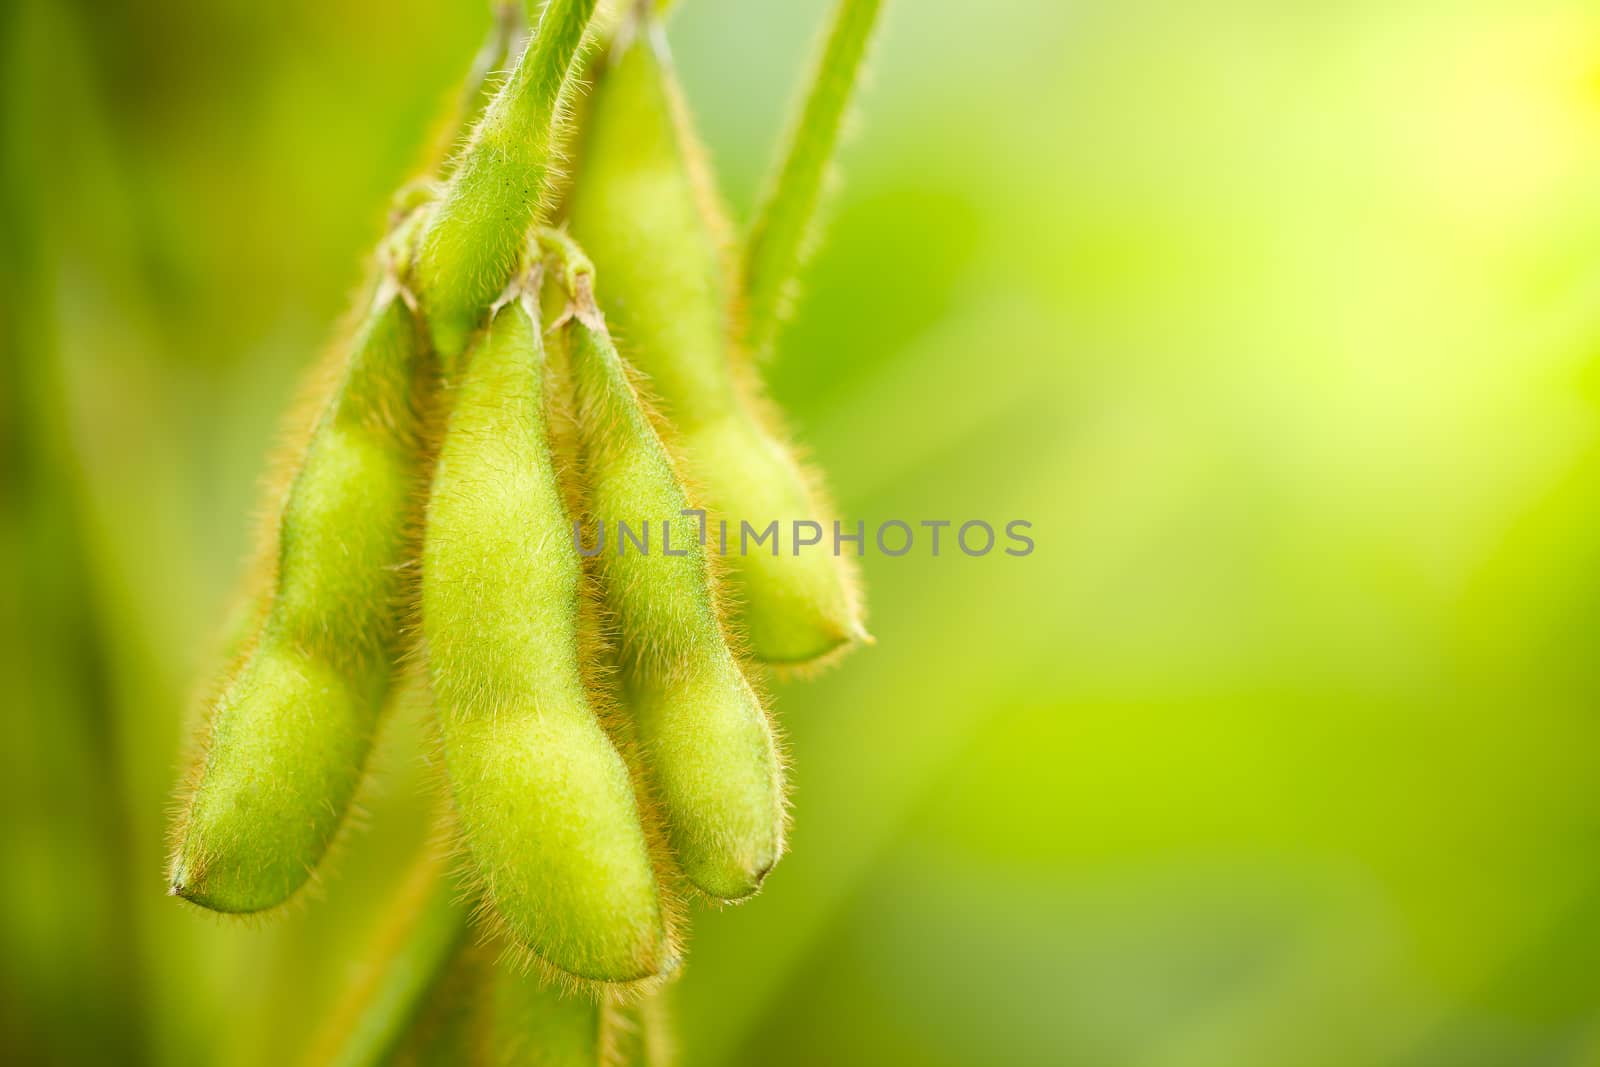 Soybeans pods on the tree and green nature background. Closeup a by SaitanSainam